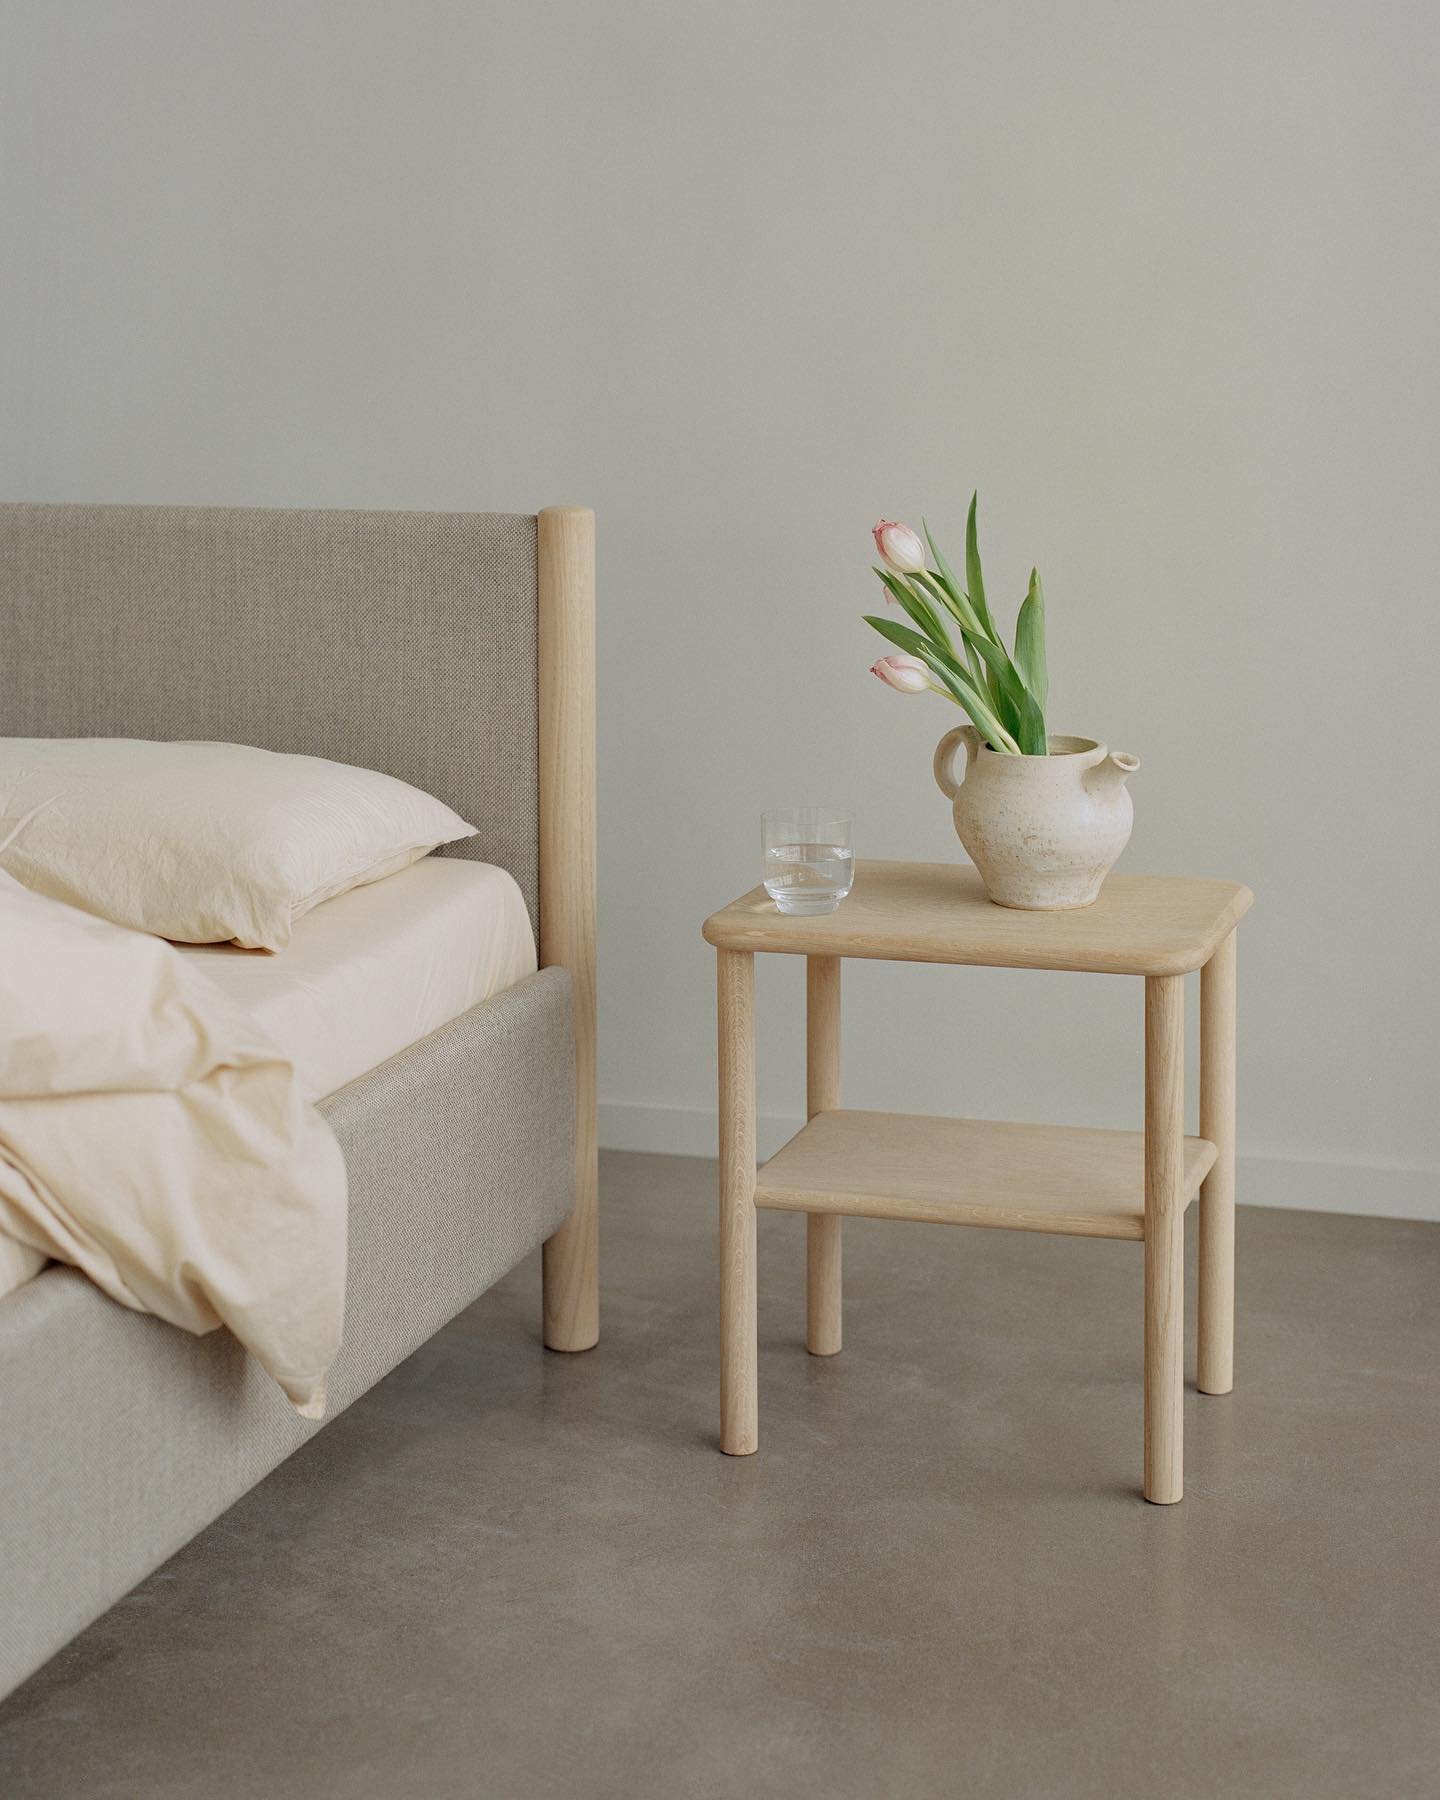 Veng bed &amp; Ry nightstand 
This Veng bed is upholstered with the sustainable textile Re-wool from @kvadrattextiles  VENG X RE-WOOL 

Veng bed &amp; Ry nightstand are designed for @rye_sleep 

From&nbsp;@re_beds&nbsp;photoshoot with
Styling by&nbsp